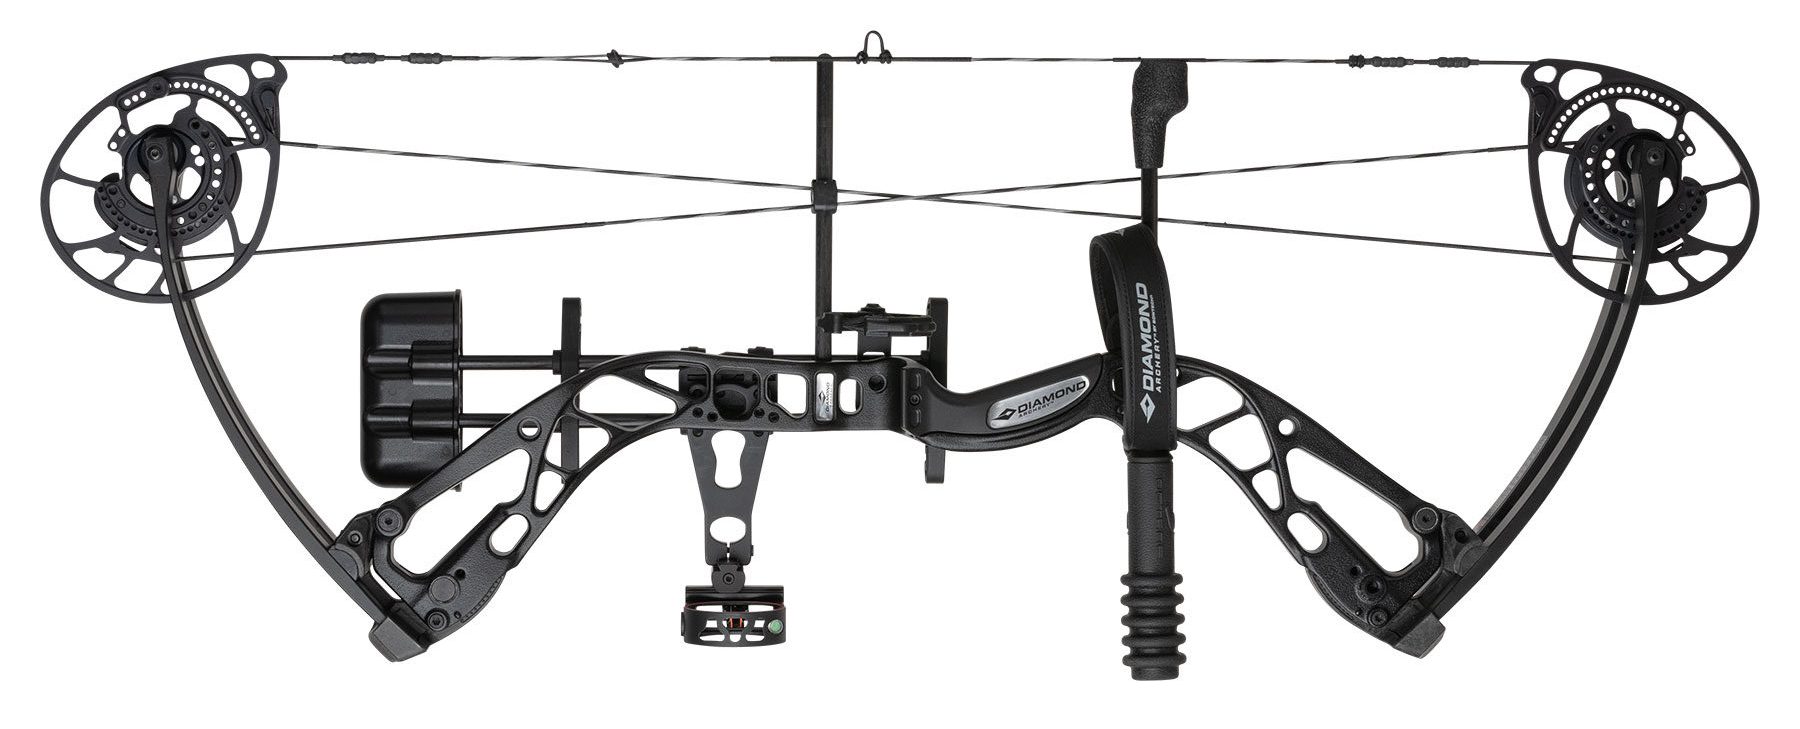 Meet the New Alter Compound Bow from Diamond Archery